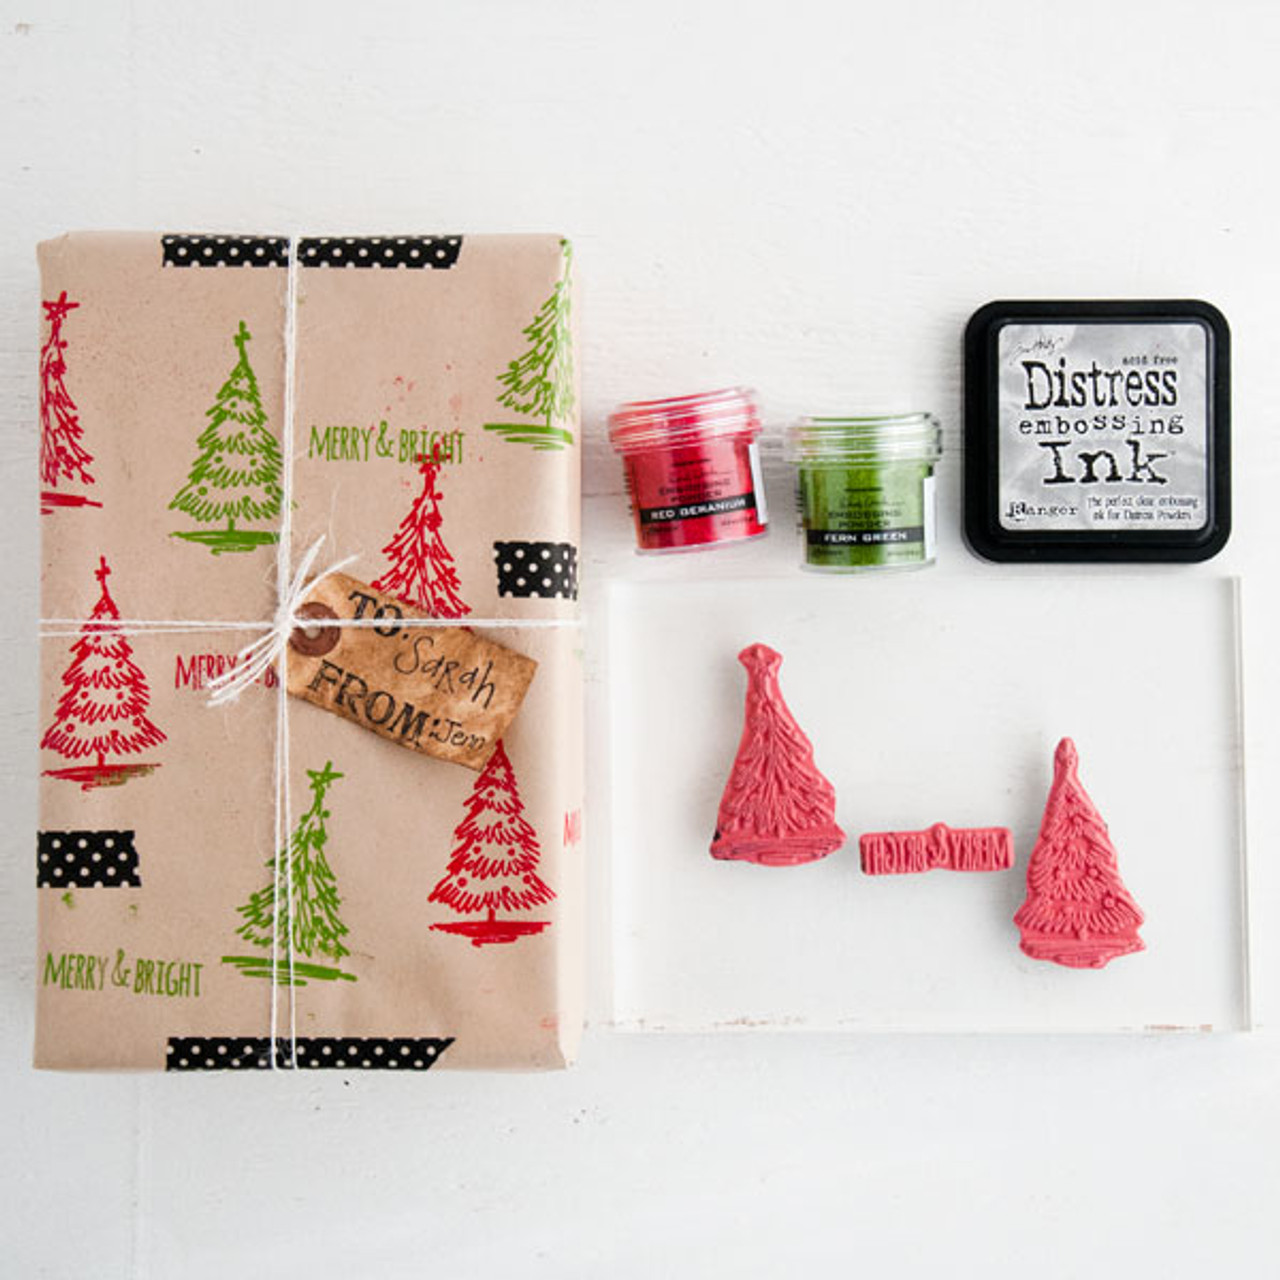 O Christmas Tree — Stamped and Embossed Wrapping Paper Project